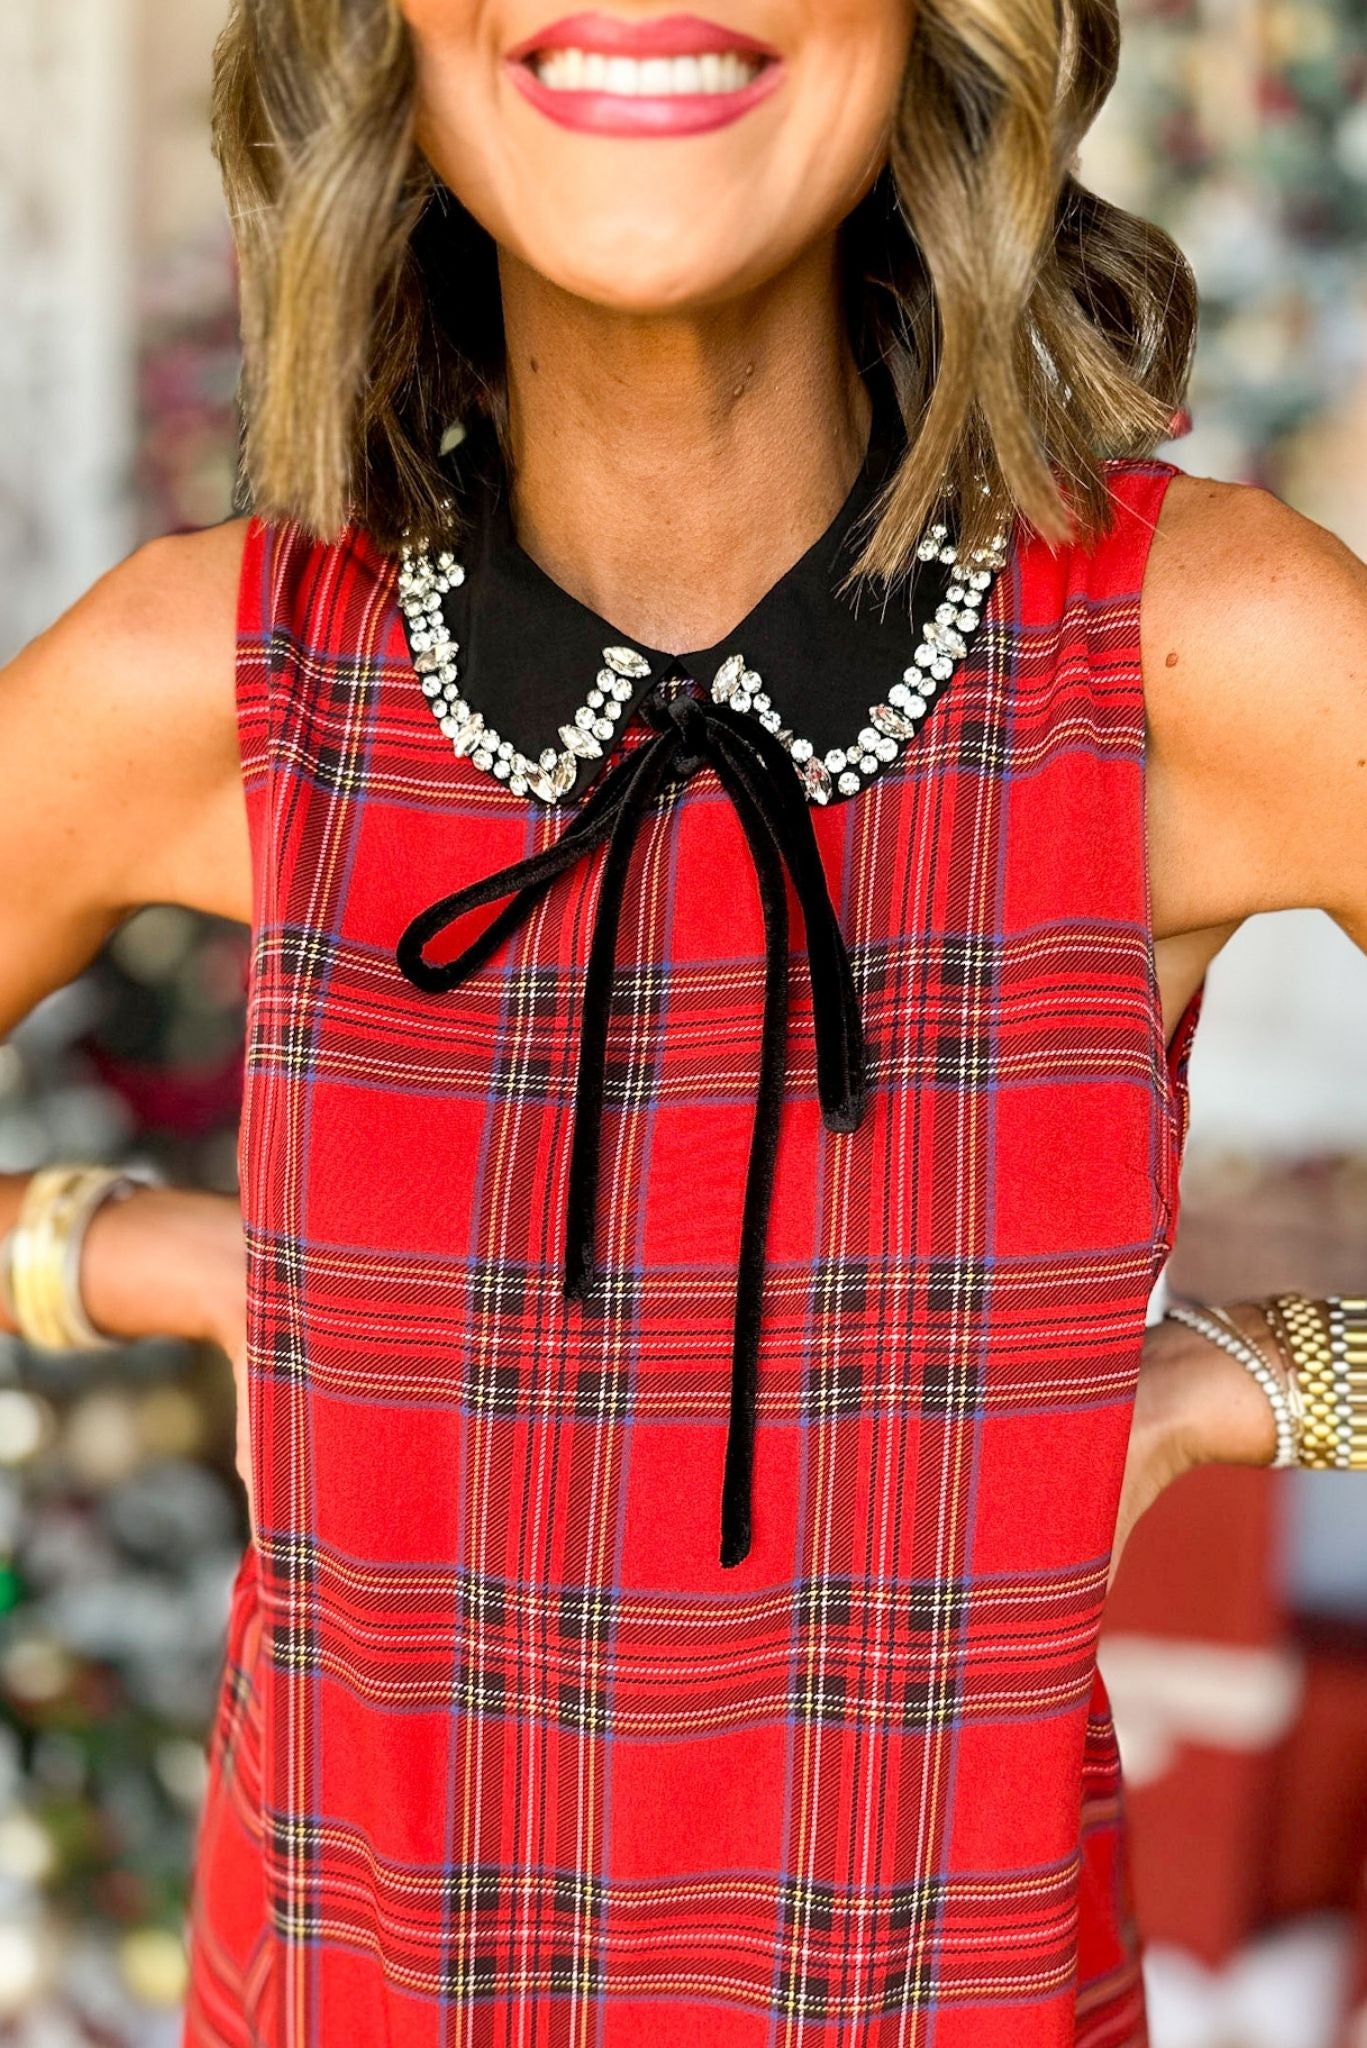 SSYS The Caroline Dress In Red Tartan Plaid, must have dress, must have style, holiady style, holiday fashion, elevated style, elevated dress, mom style, holiday collection, holiday dress, shop style your senses by mallory fitzsimmons